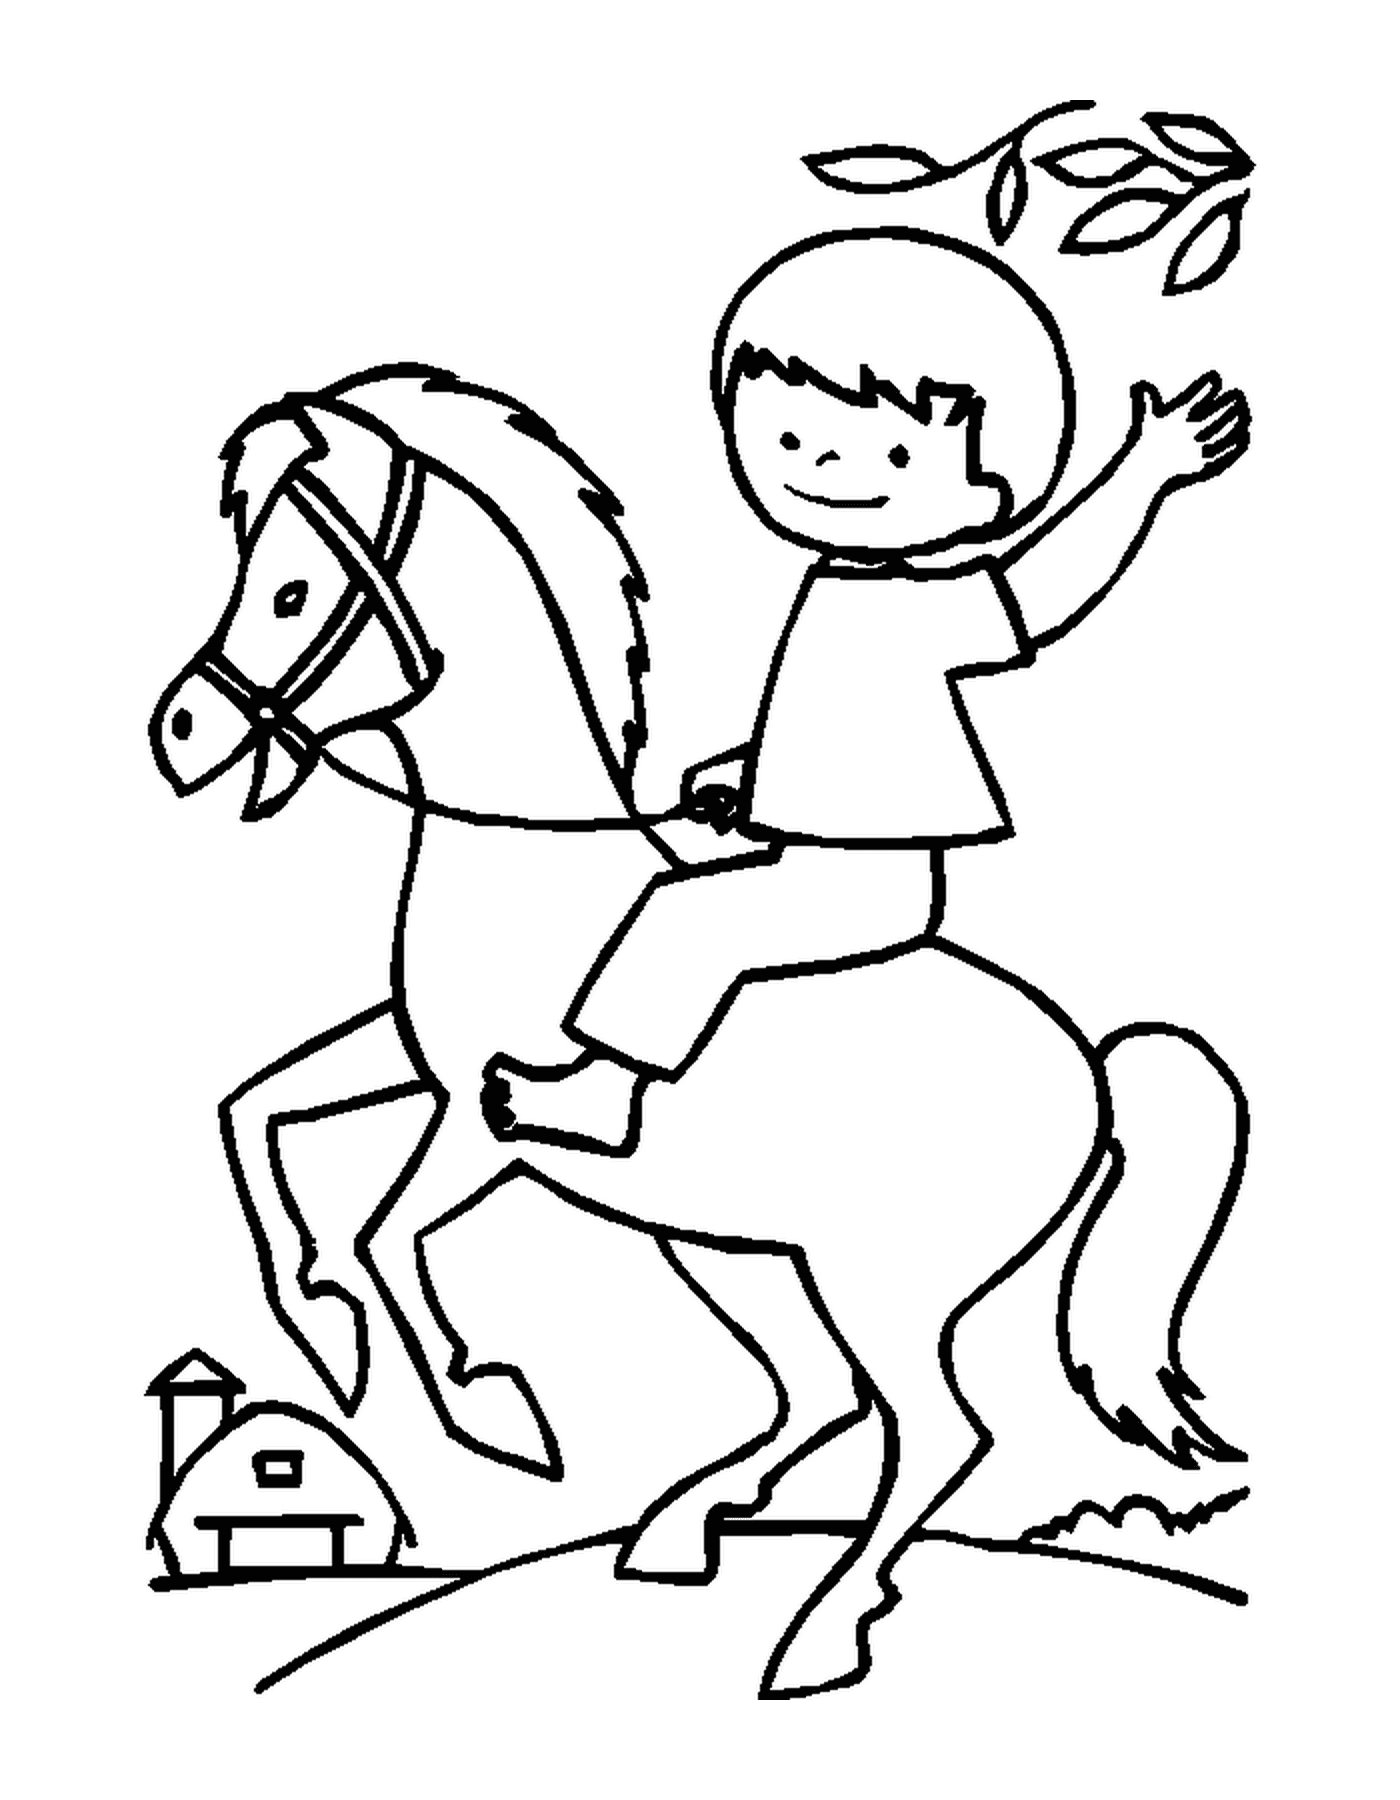  Child riding his horse happily holding the reins 